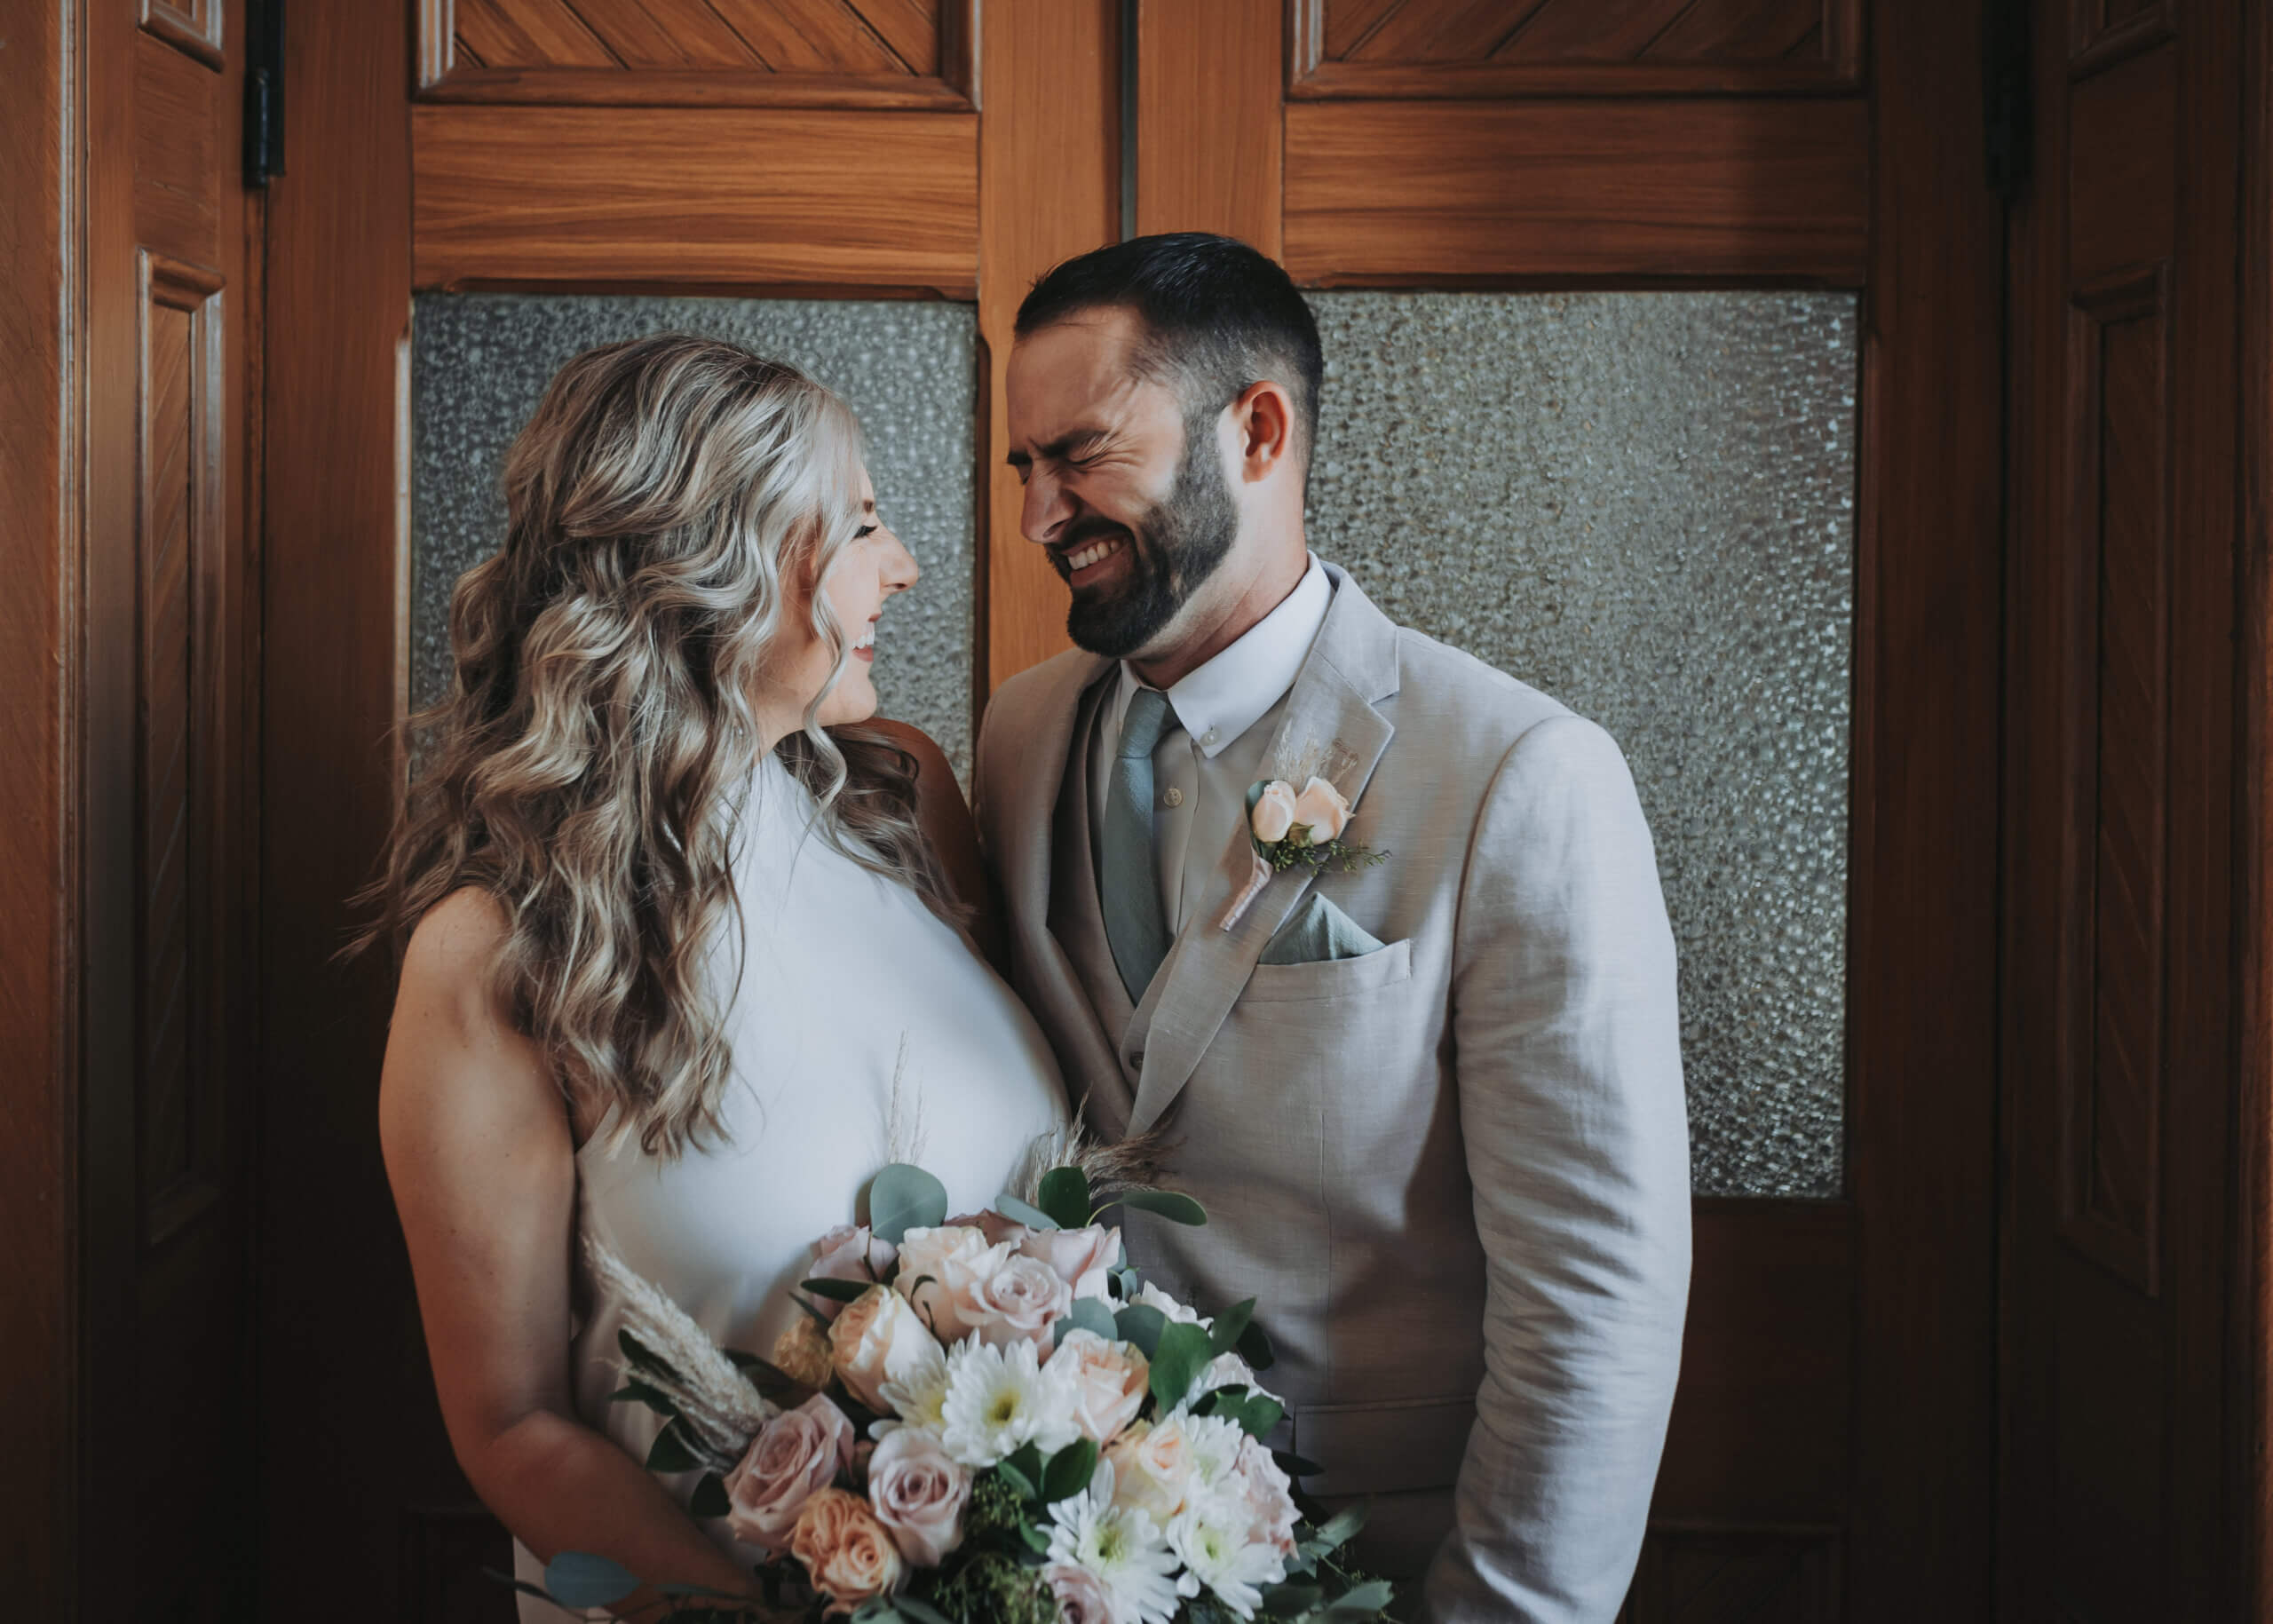 elopement portrait just before an intimate ceremony, shot by Wandering Creative